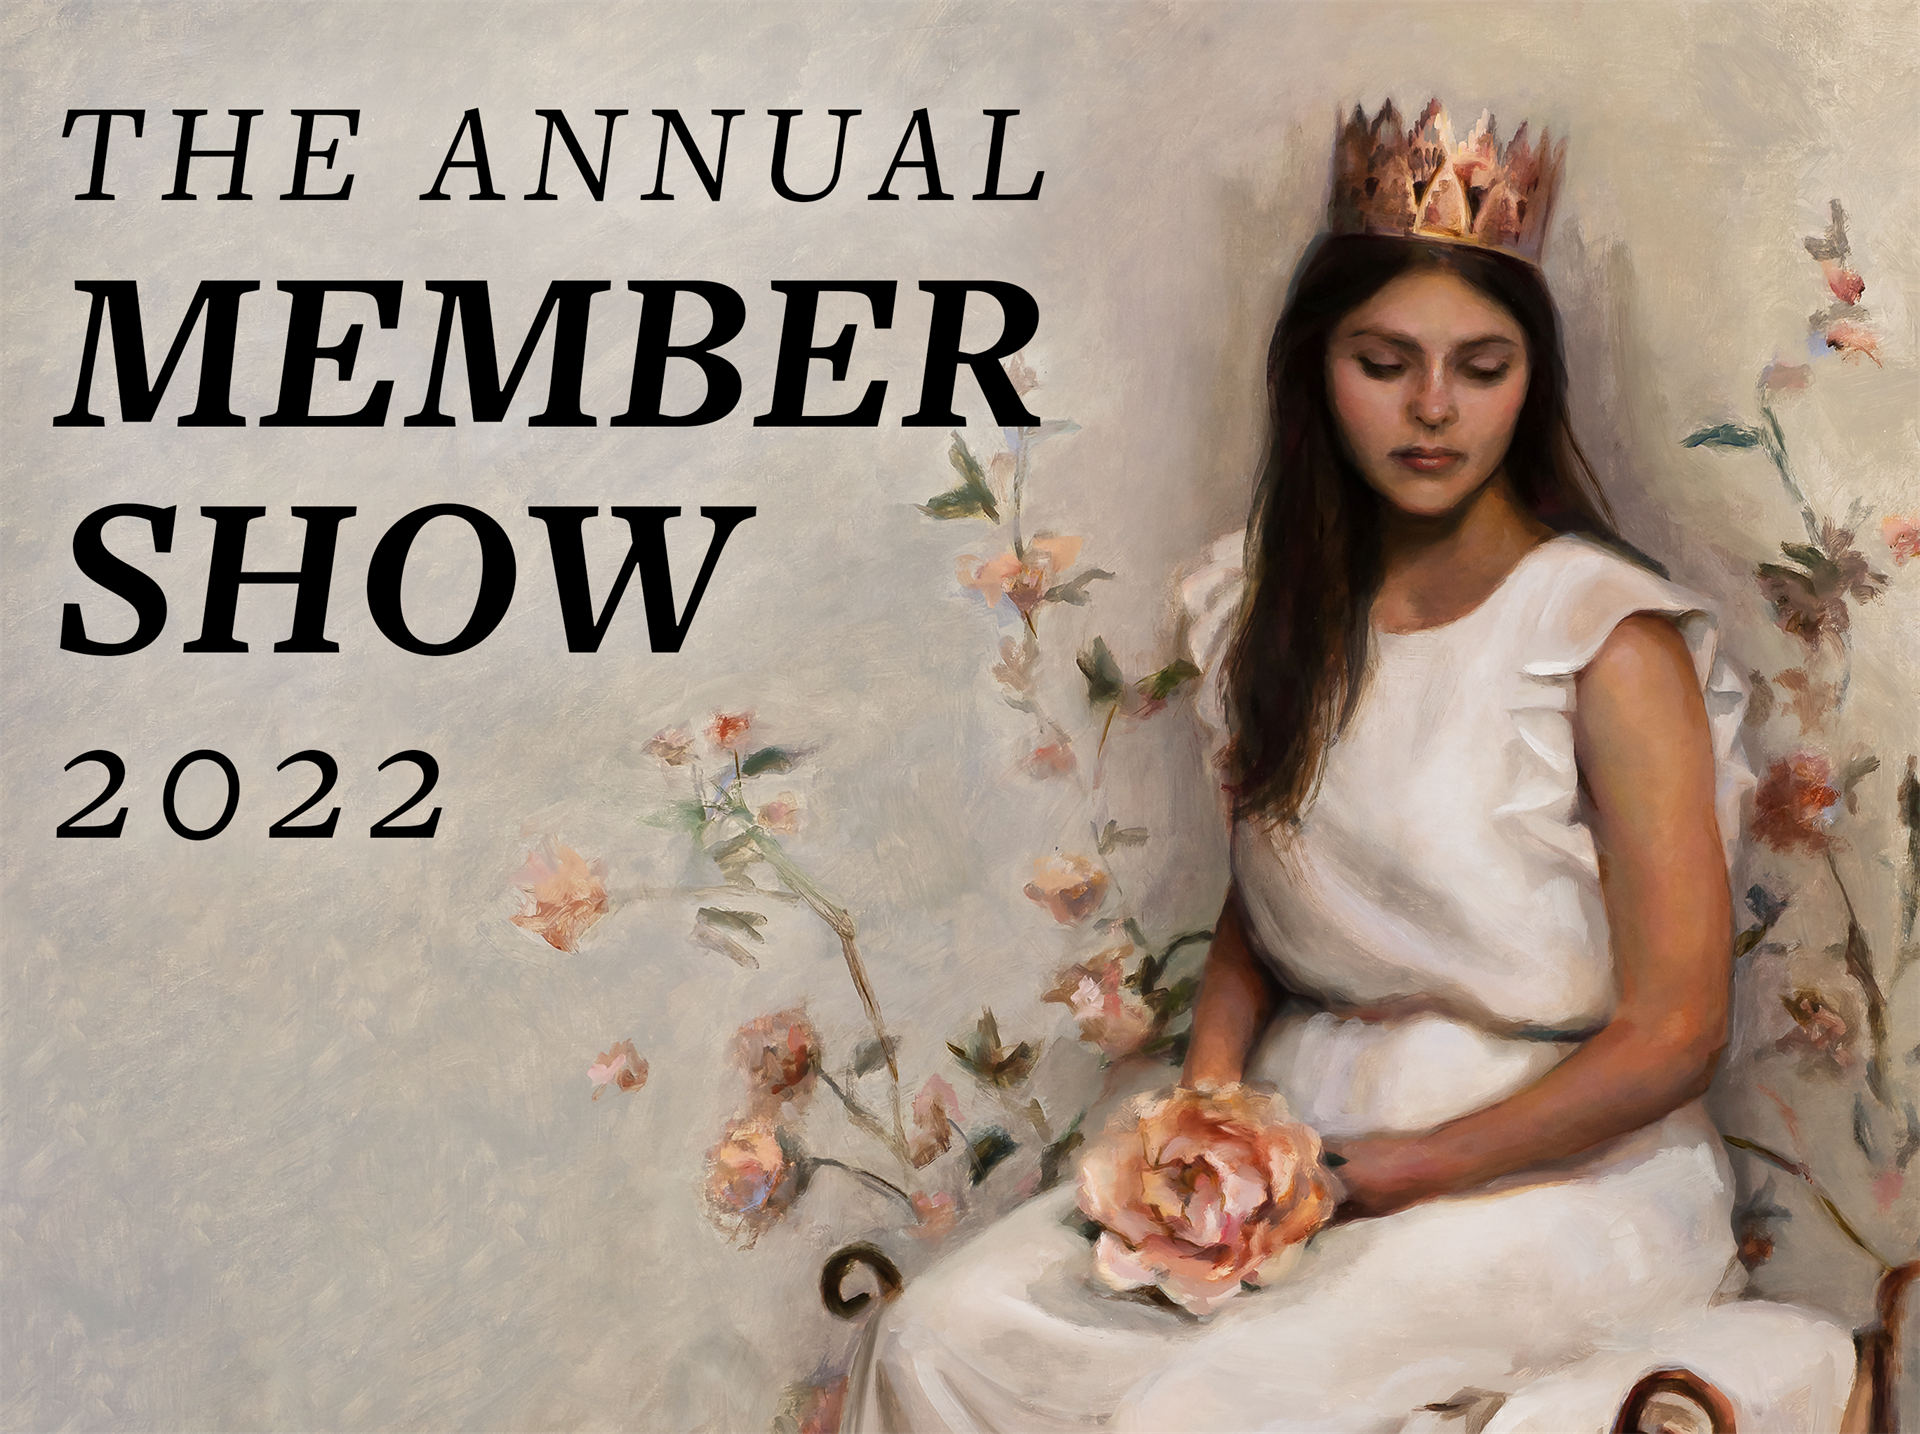 The Annual Member Show 2022